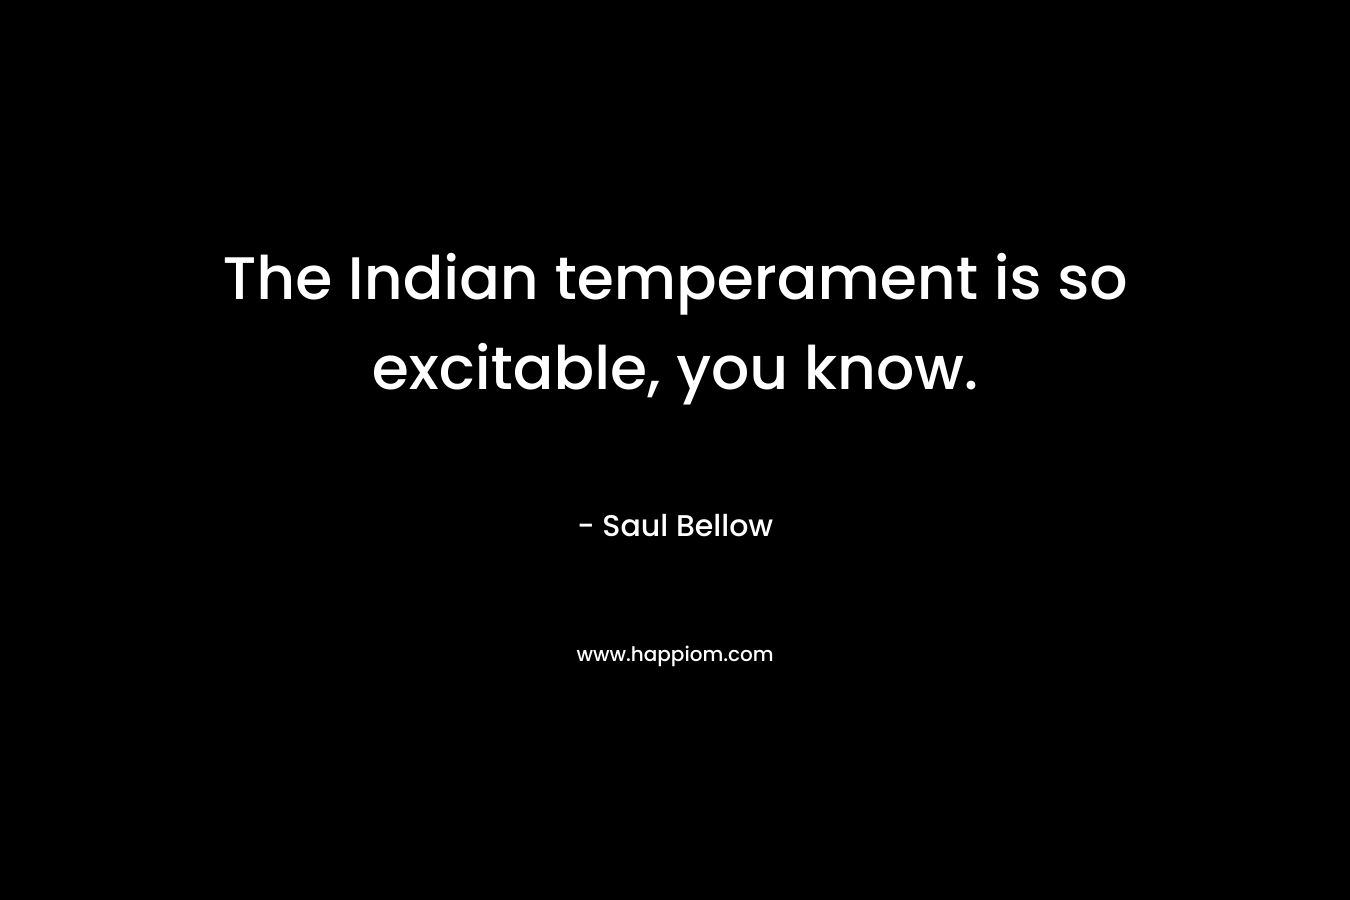 The Indian temperament is so excitable, you know. – Saul Bellow